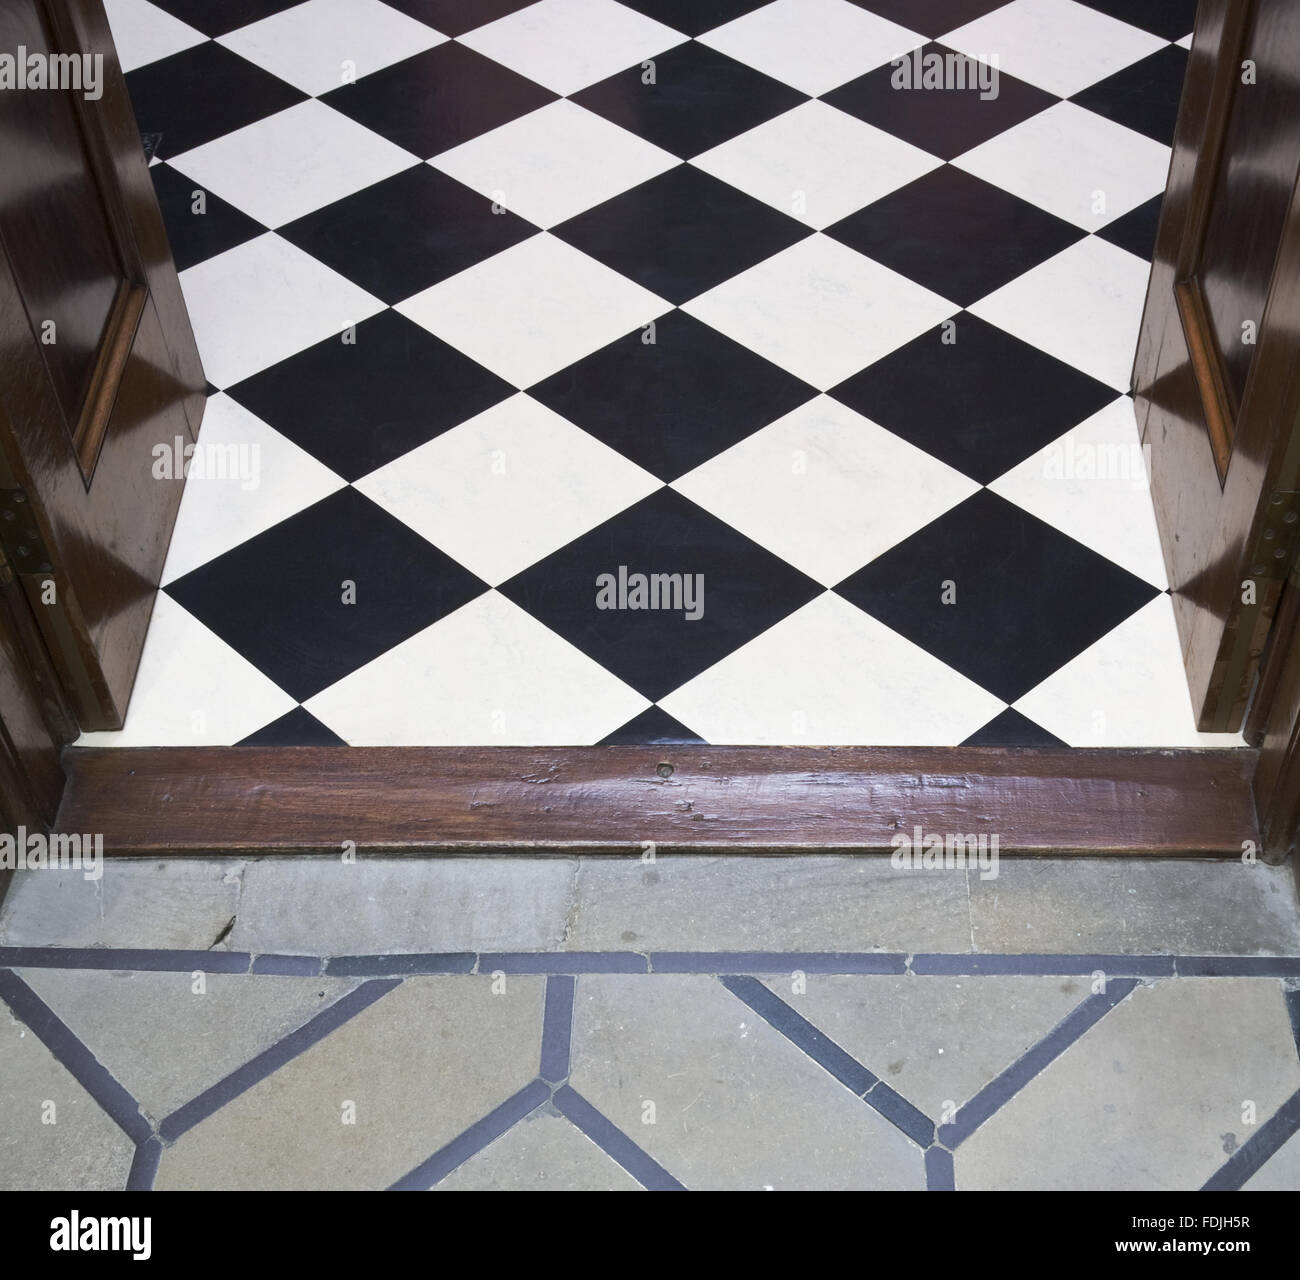 The meeting of the floors of the Hall with black and white linoleum and the Black and White Hall with grey stone floor, at Mount Stewart House, Co. Down, Northern Ireland. Stock Photo